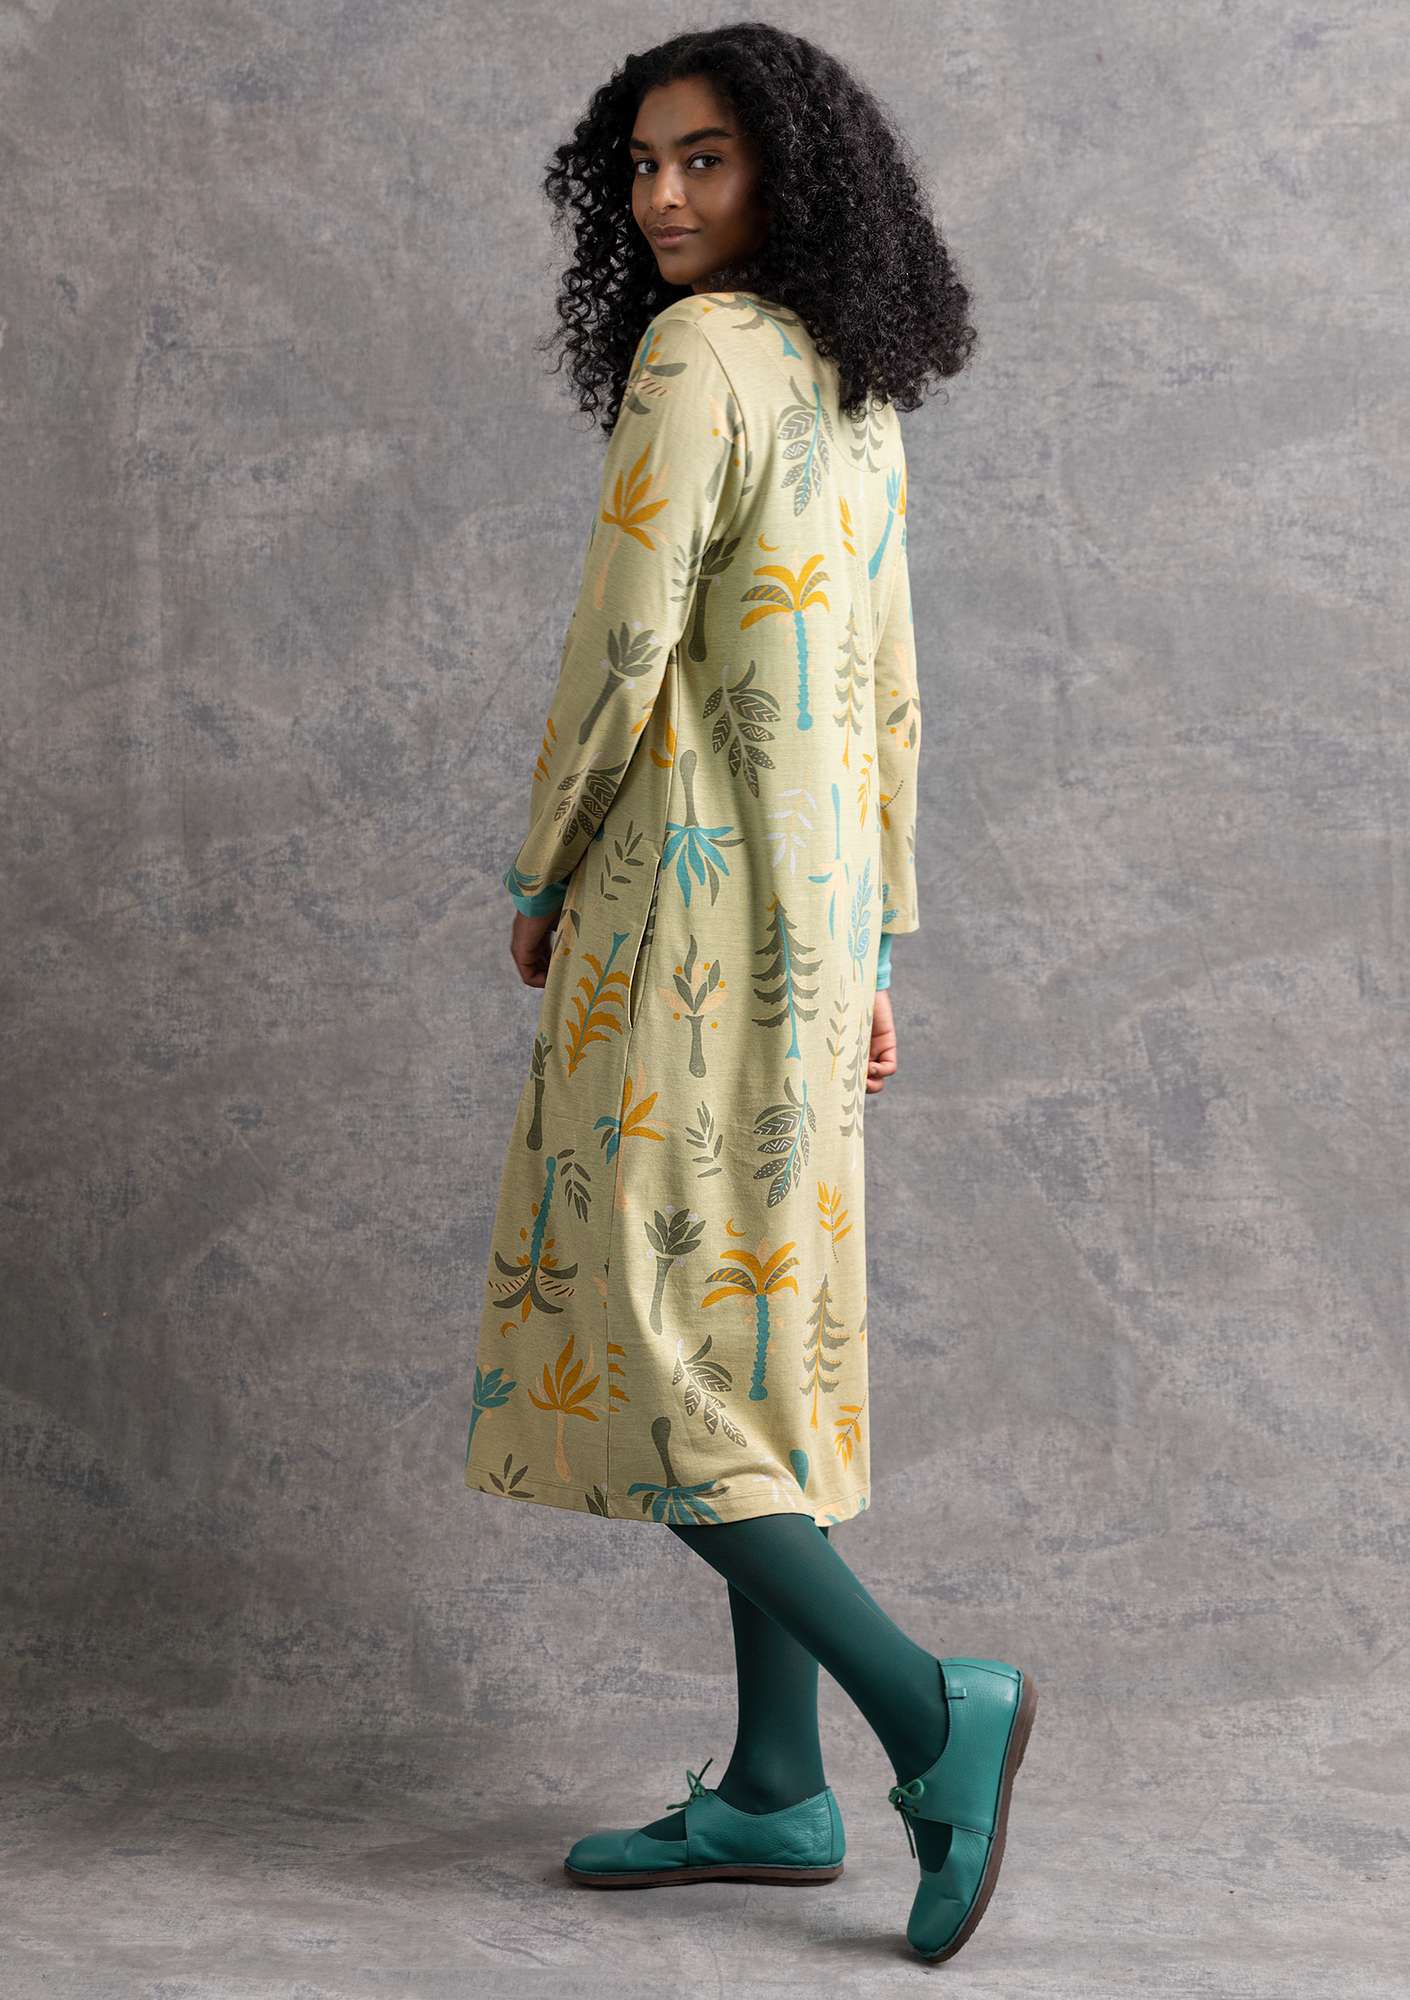 “Forest” jersey dress in organic cotton/modal timothy